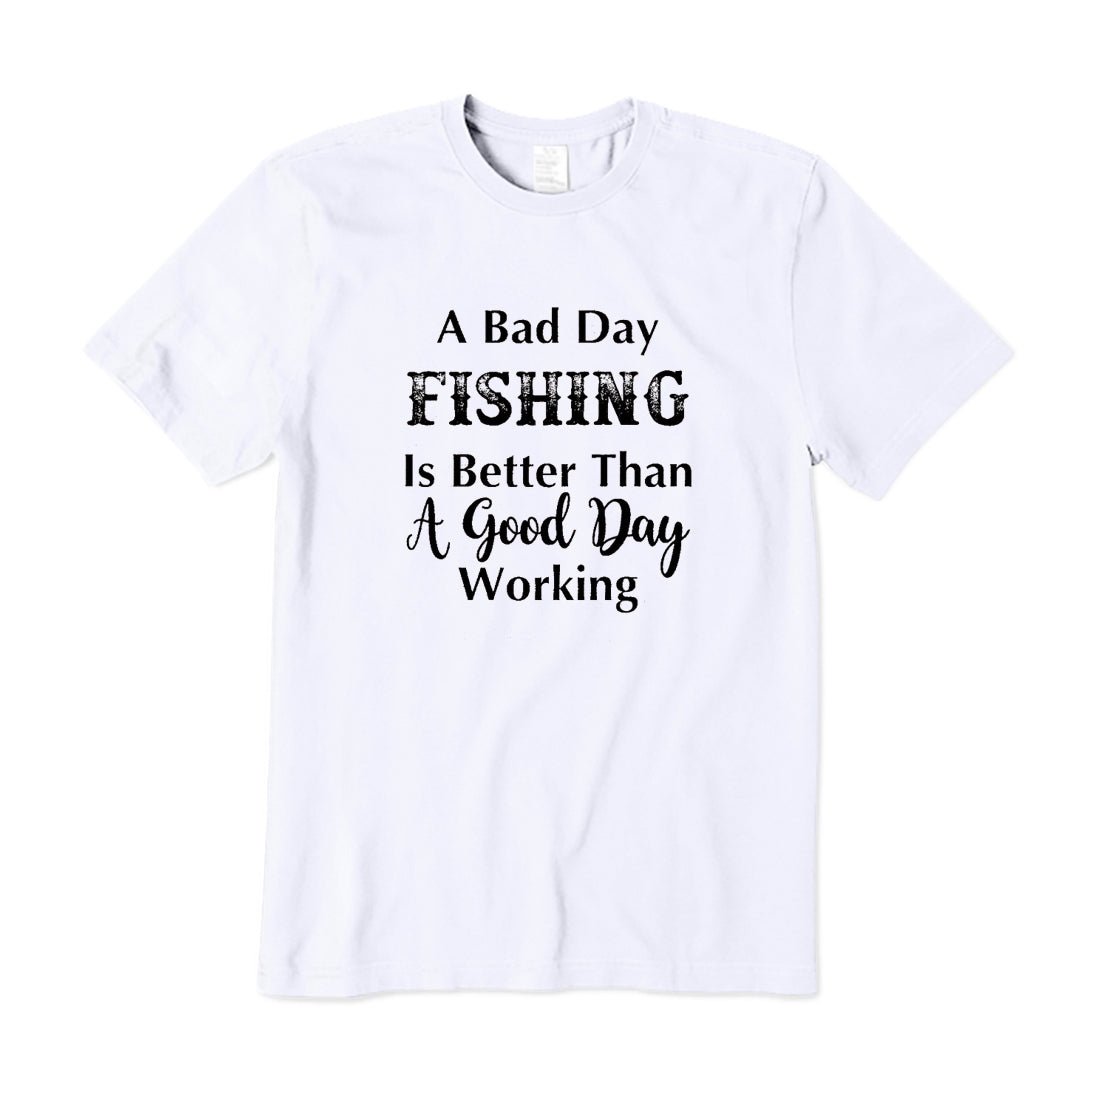 A Bad Fishing Day Is Better Than A Good Working Day T-Shirt